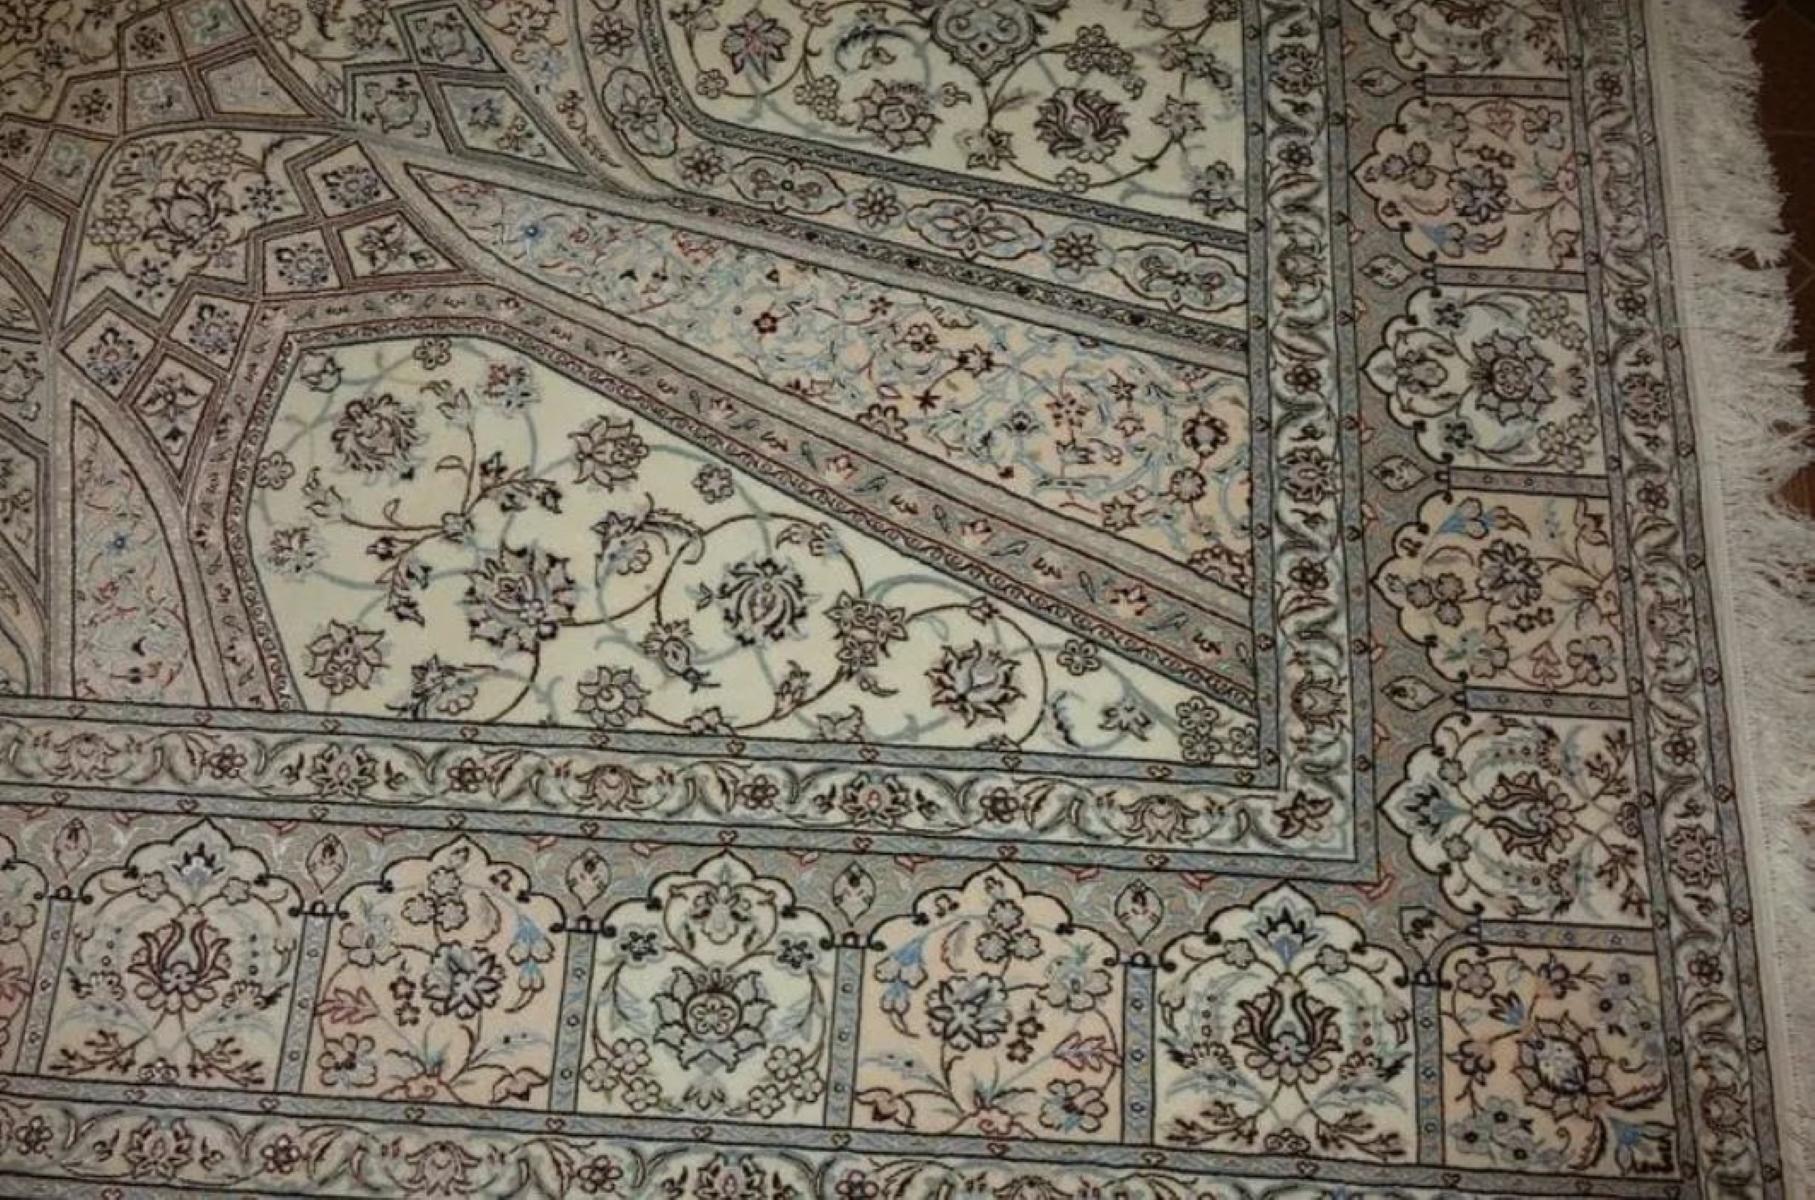 Very fine Persian Rug Nain 500 Knots per inch, Size 10.2 x 6.11 Iran Nain Habbibian Wool and Silk. Around 5,000,000 knots tied by hand one by one. It takes 3 years to complete this piece of art.